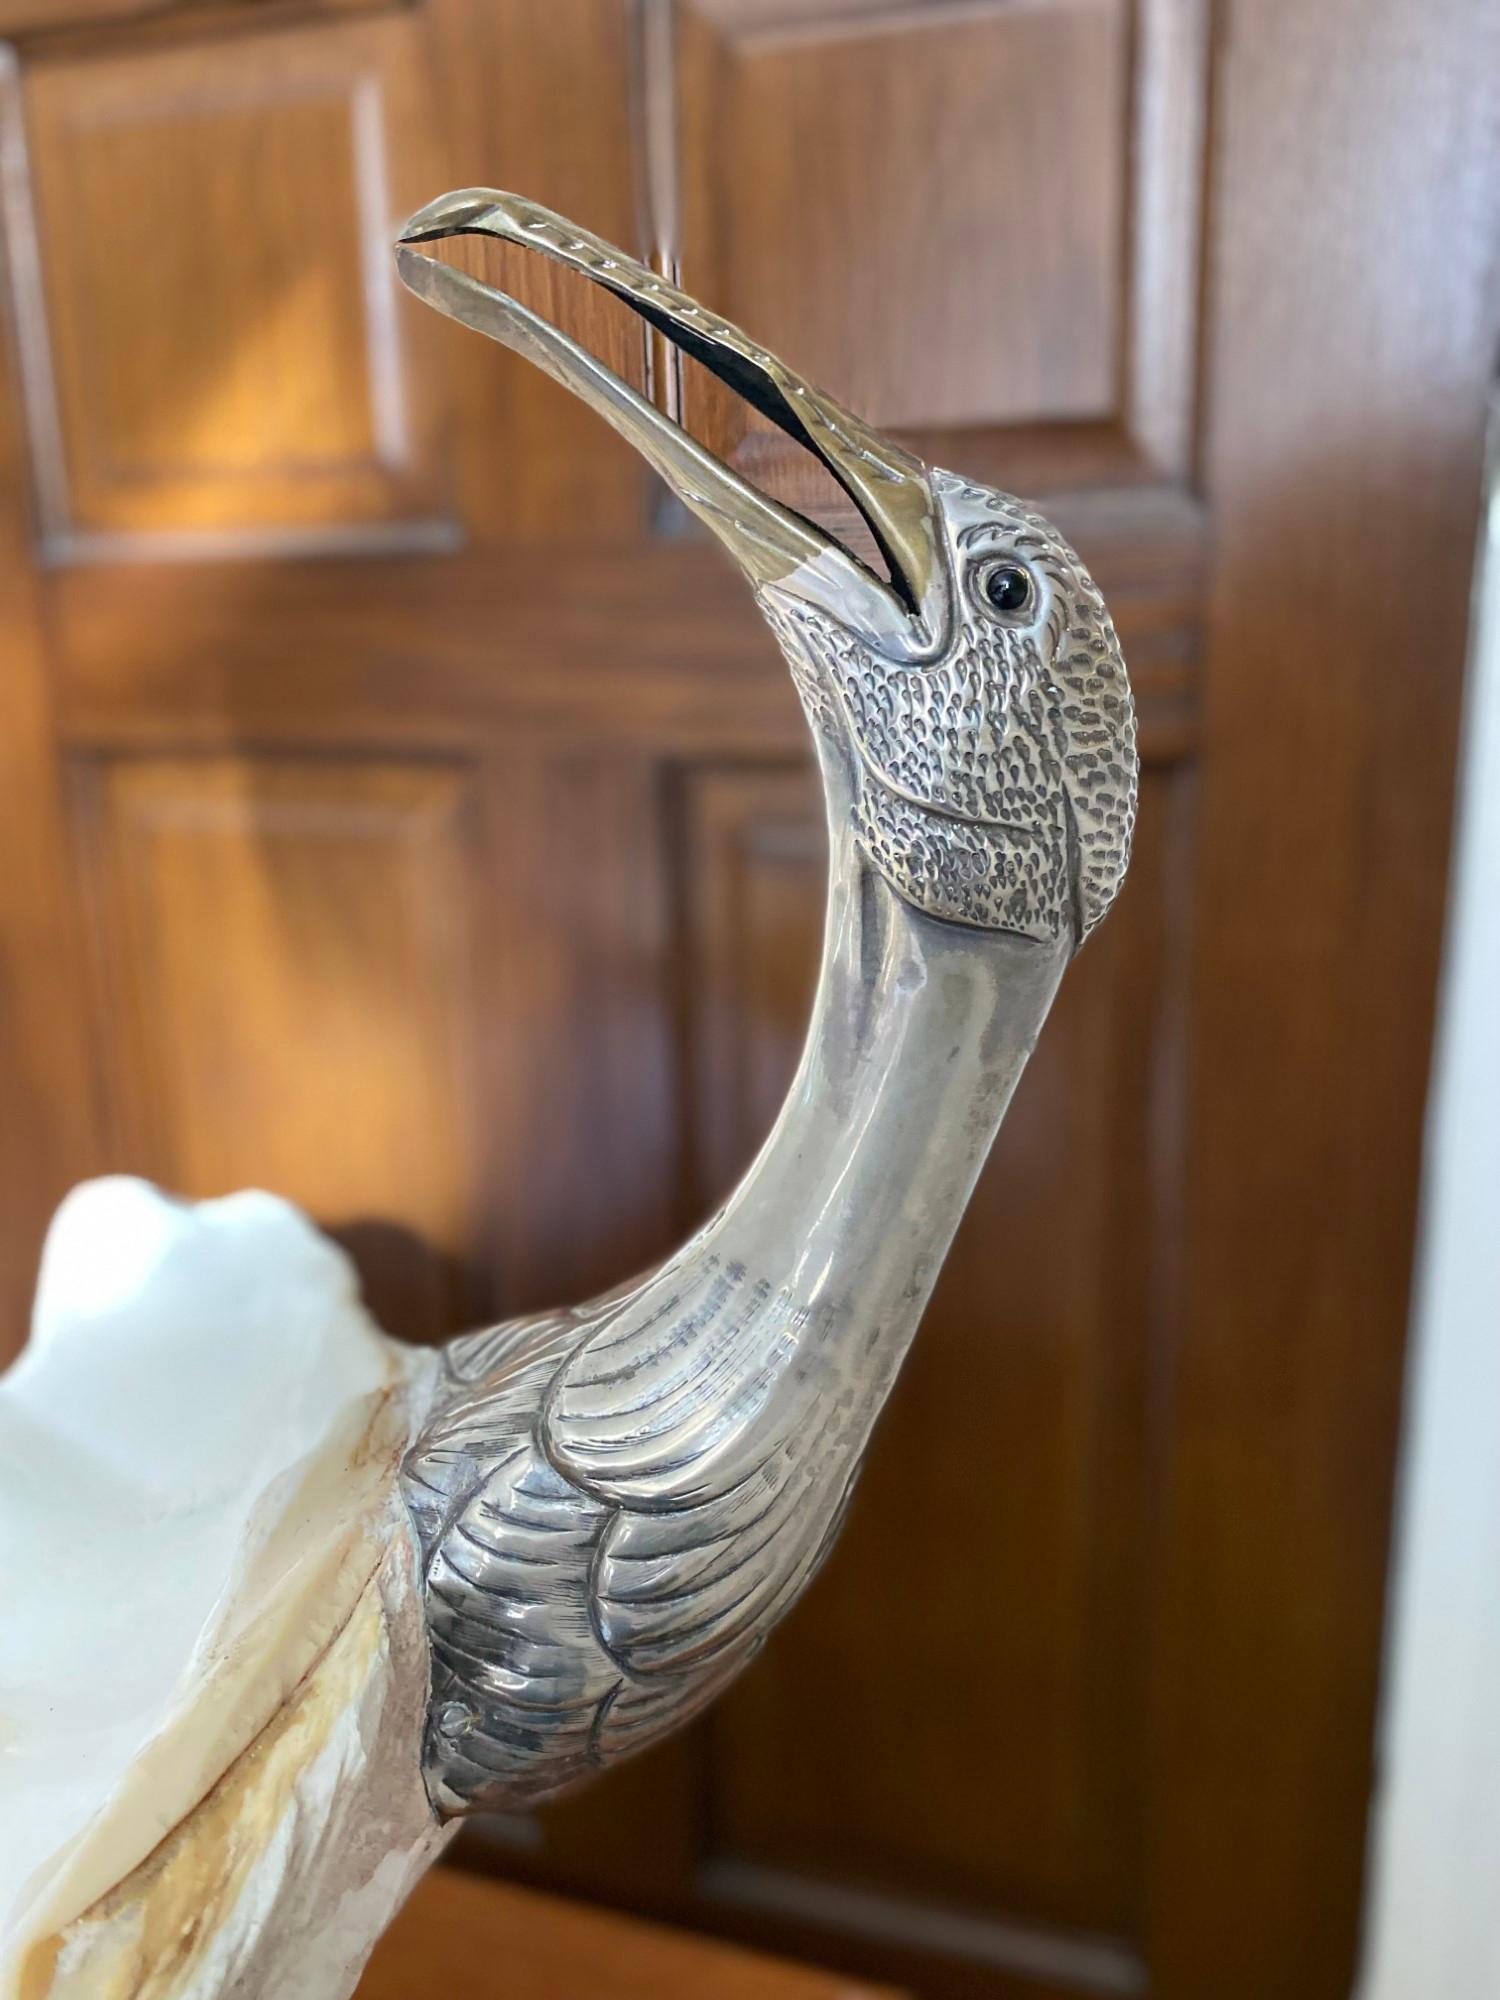 Silver Plate Midcentury Bird Sculpture by Gabriella Binazzi with Giant Clam Shell, Italian